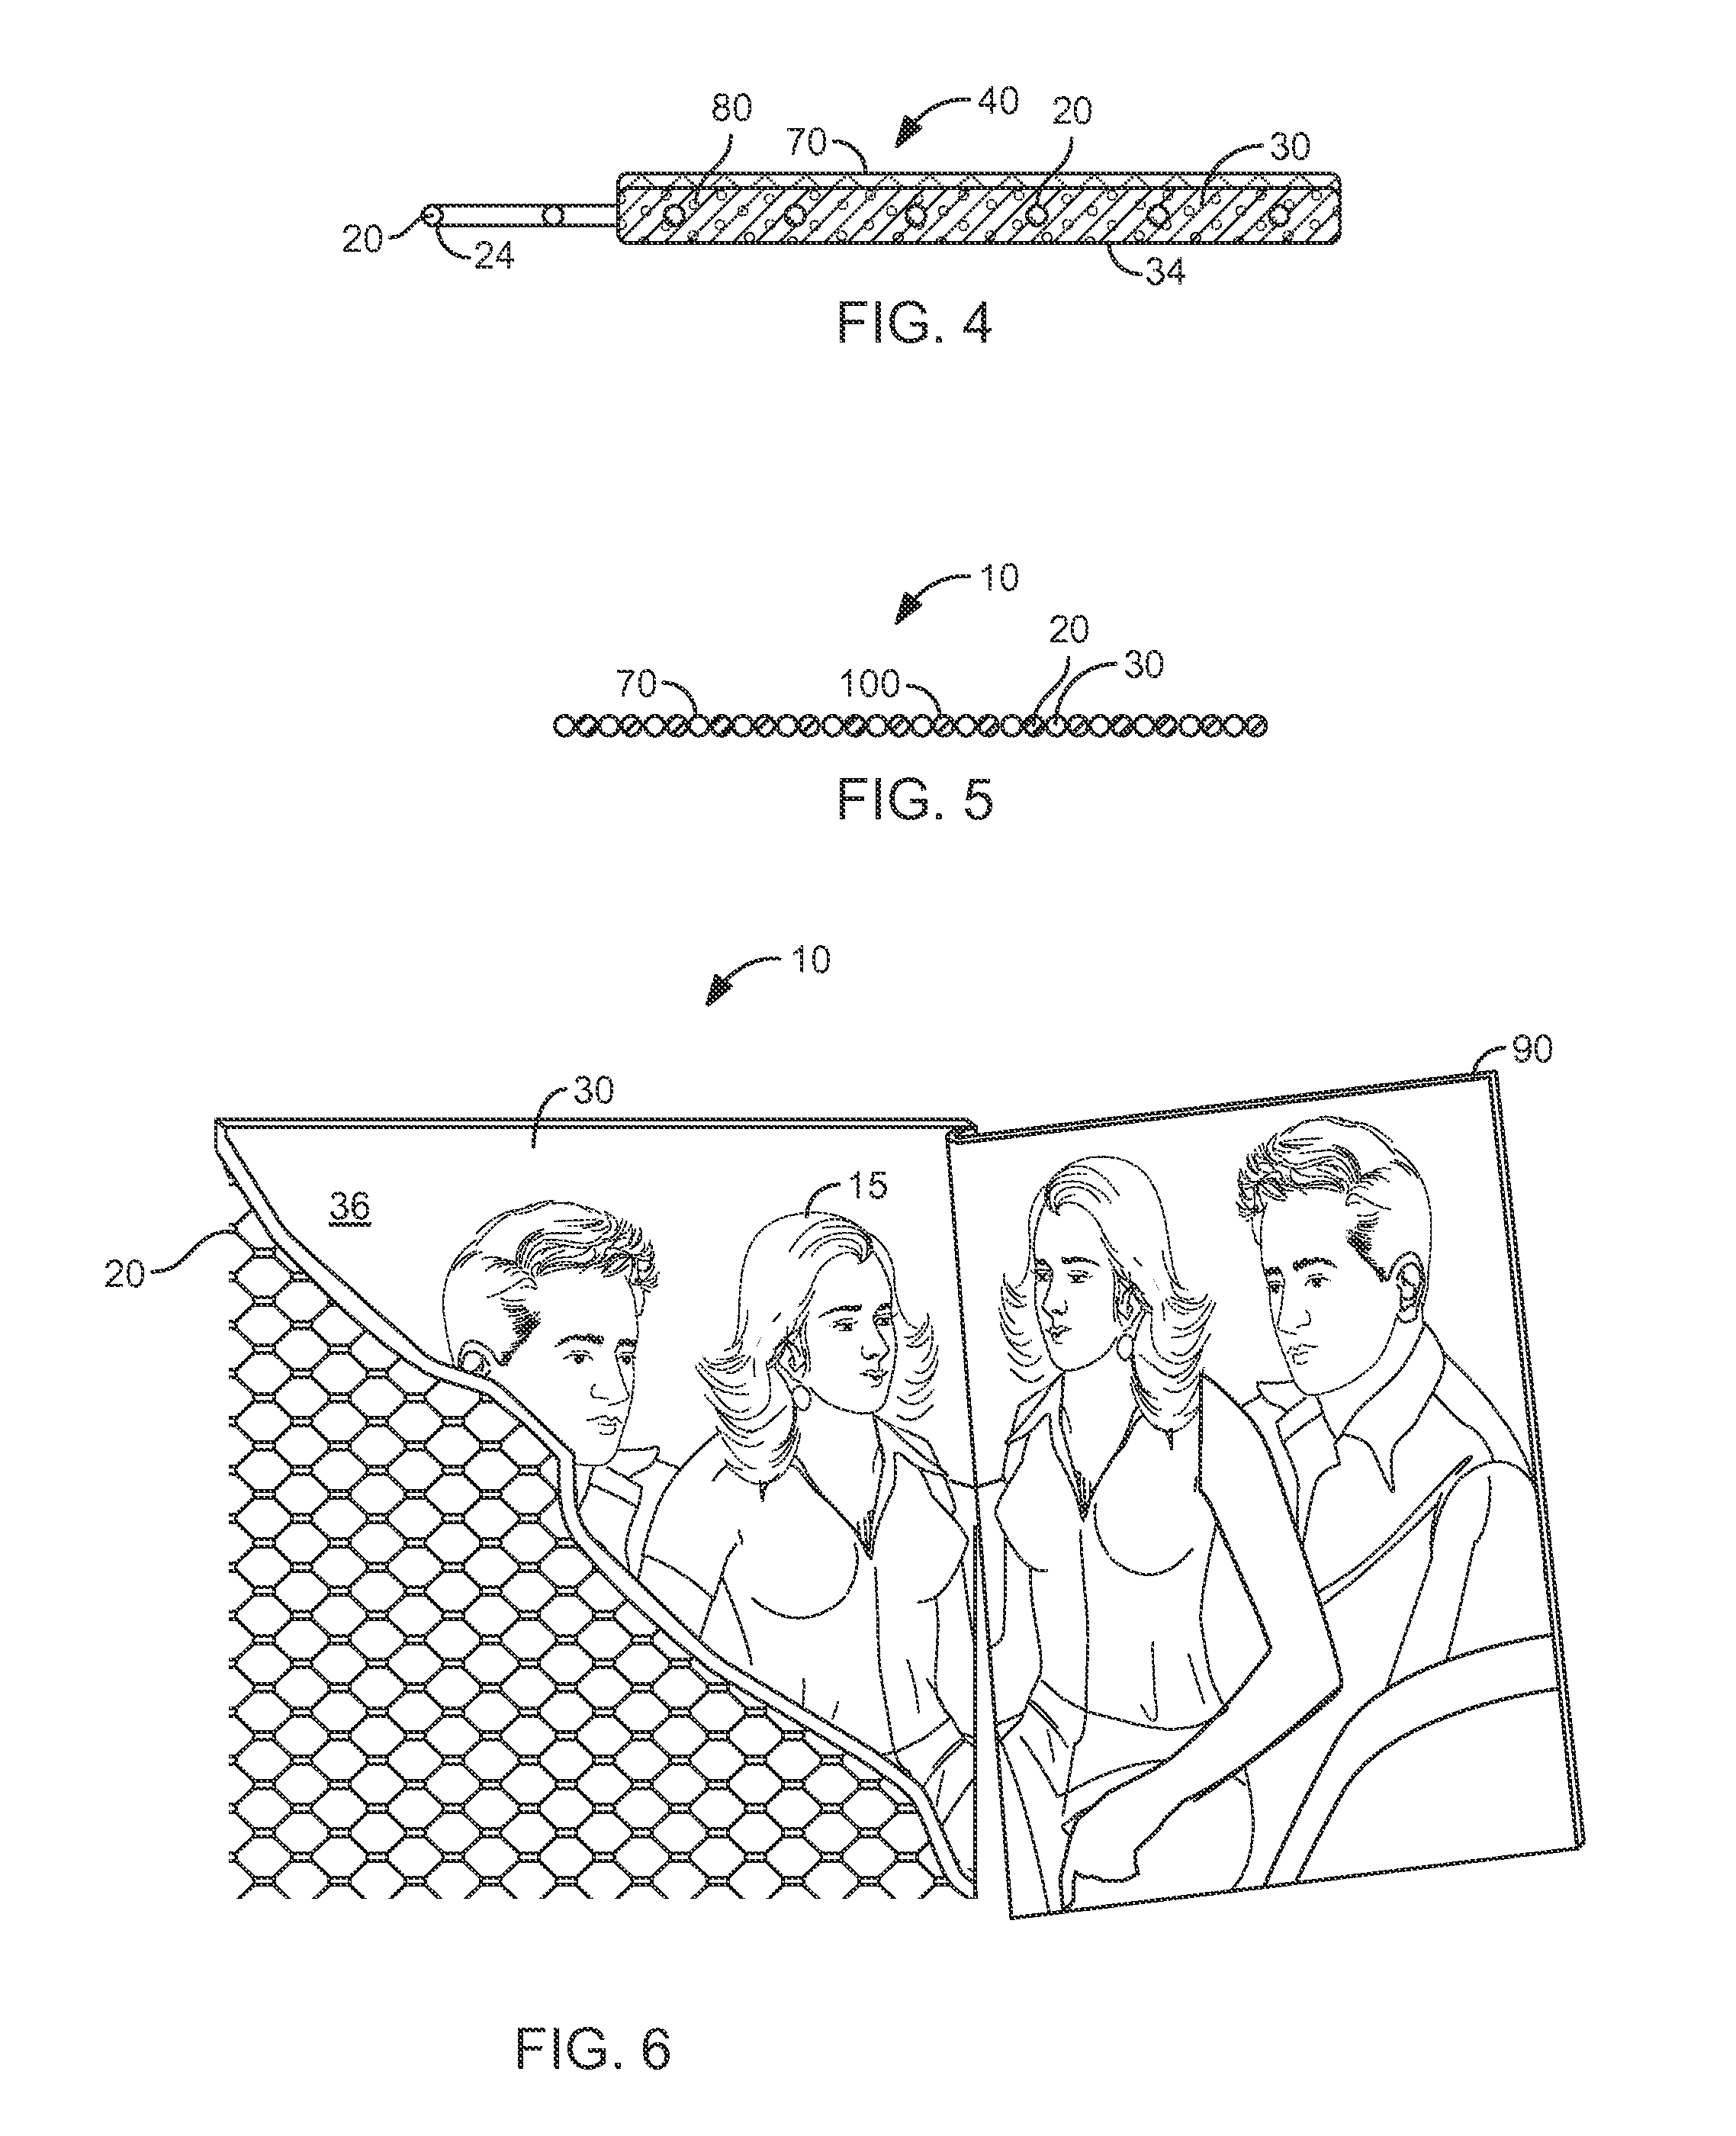 Ductile Printed Media and methods of use therefore